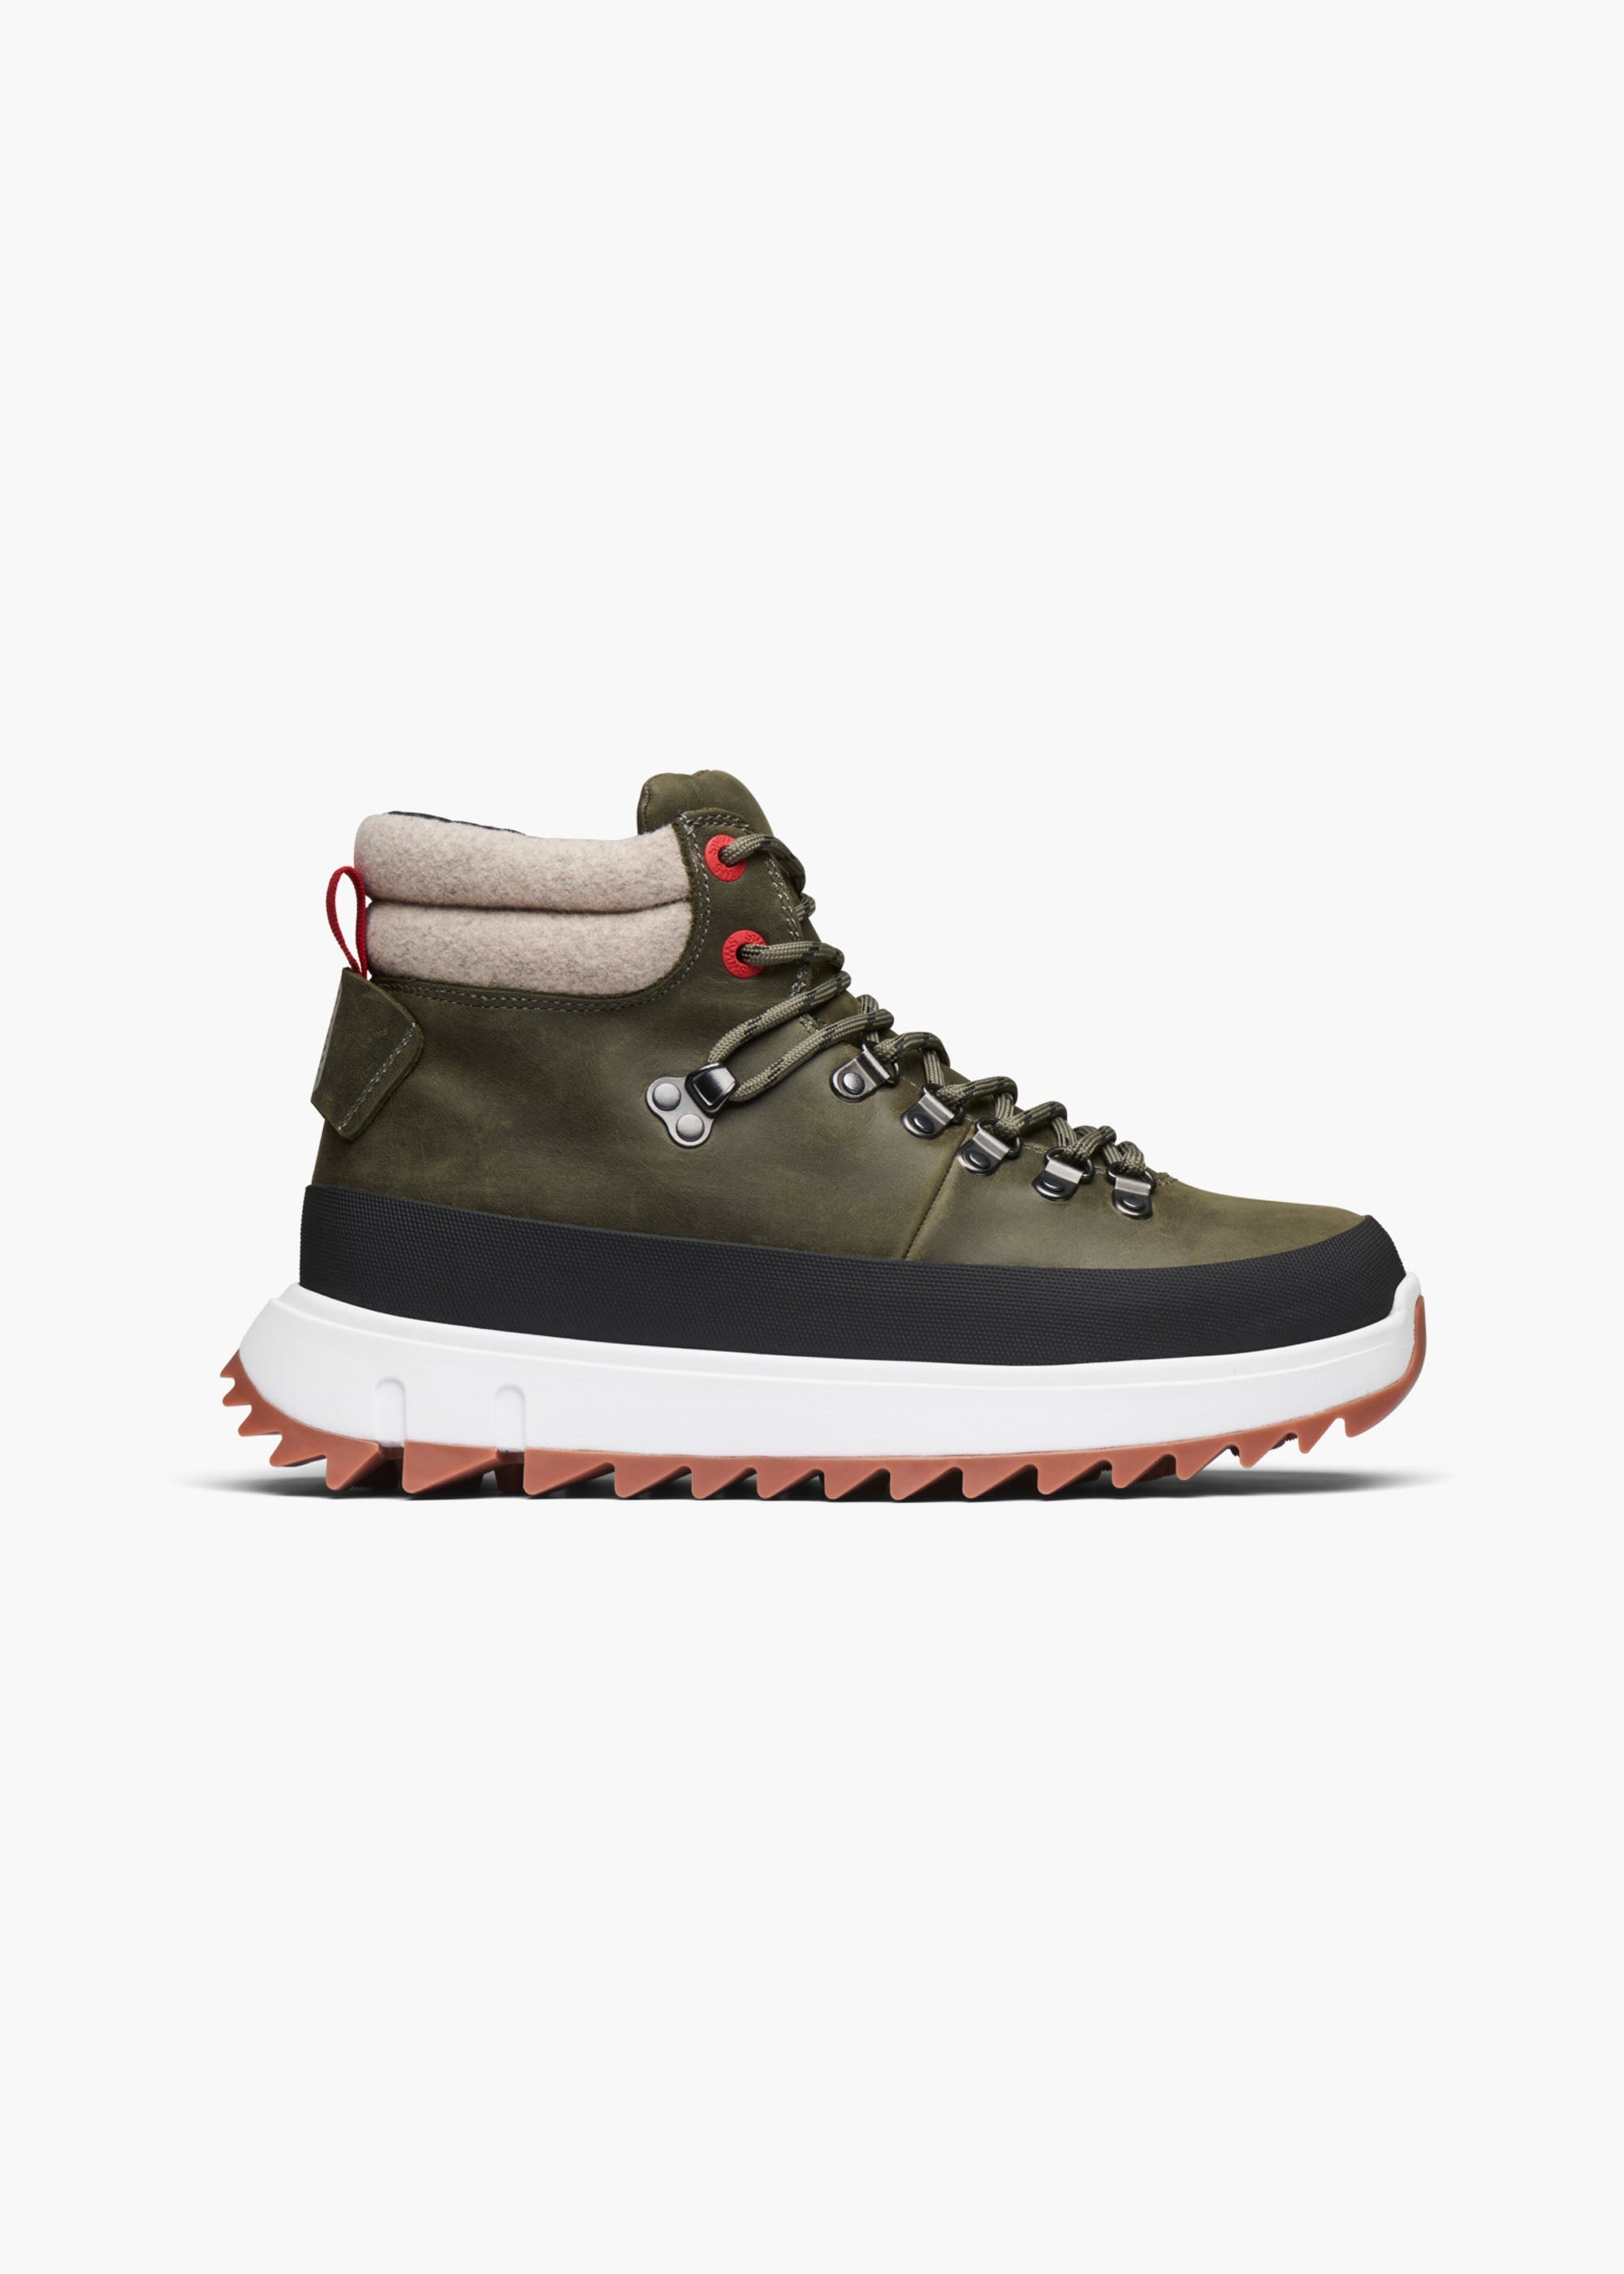 Fjell Boot in Hickory for Mens | SWIMS | SWIMS